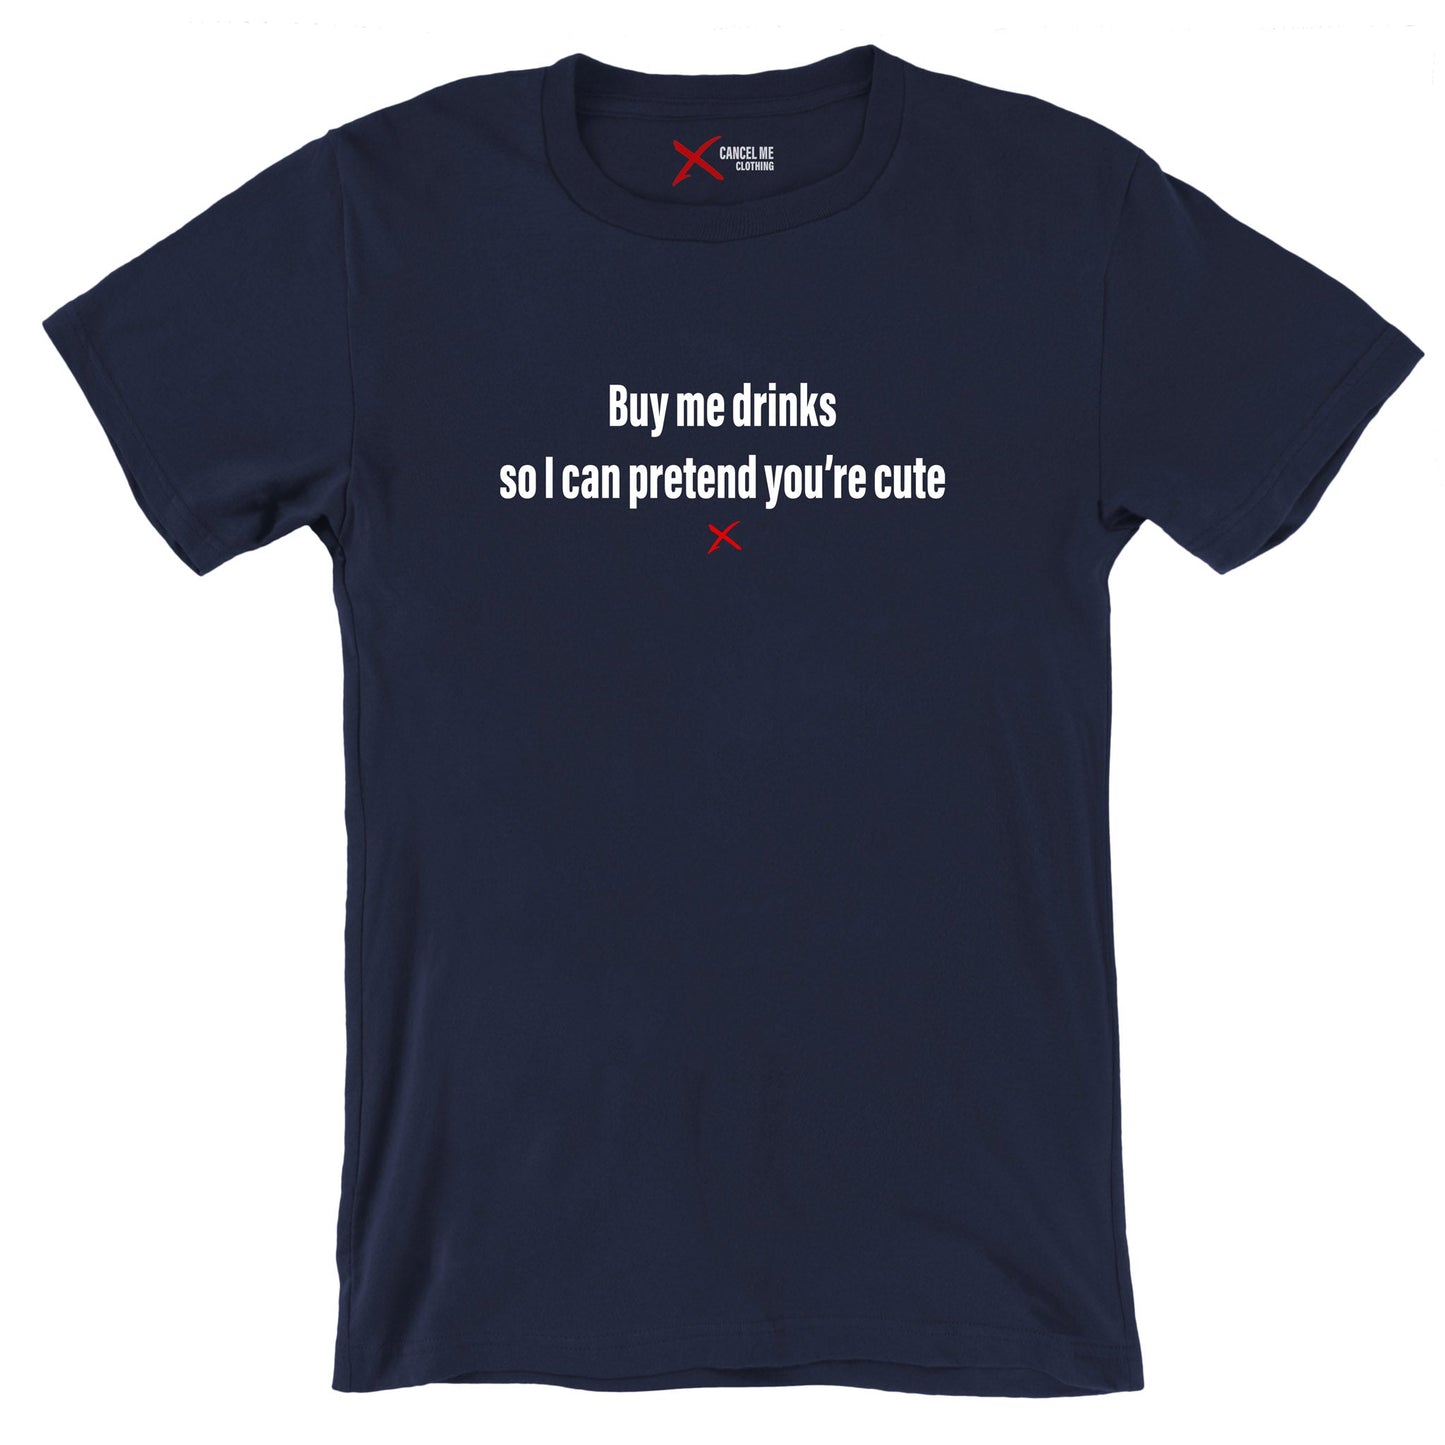 Buy me drinks so I can pretend you're cute - Shirt